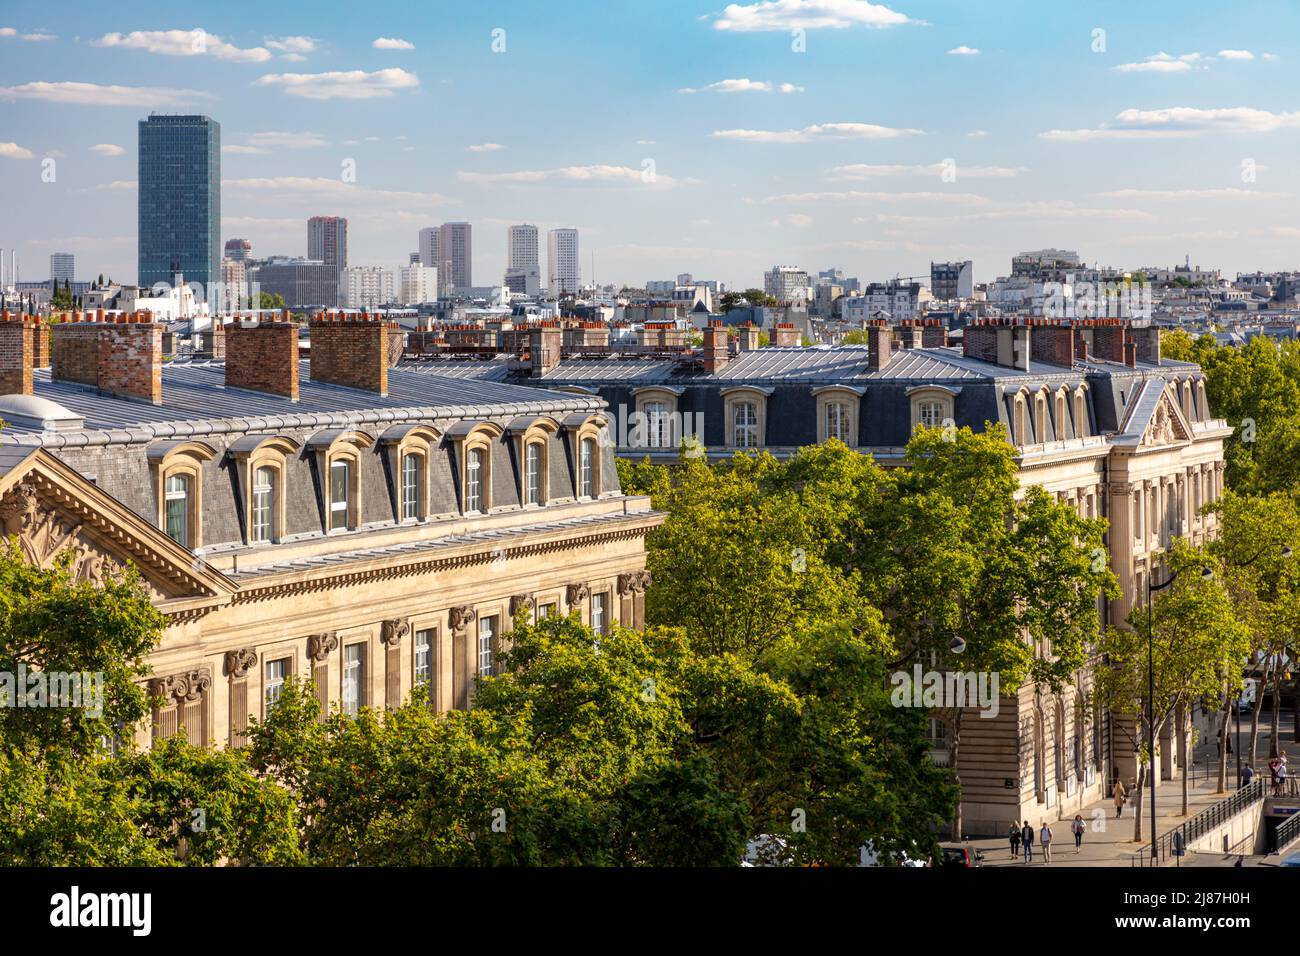 Elevated view over buildings in the 4th Arrondissement, Paris, Ice-de-France, France Stock Photo